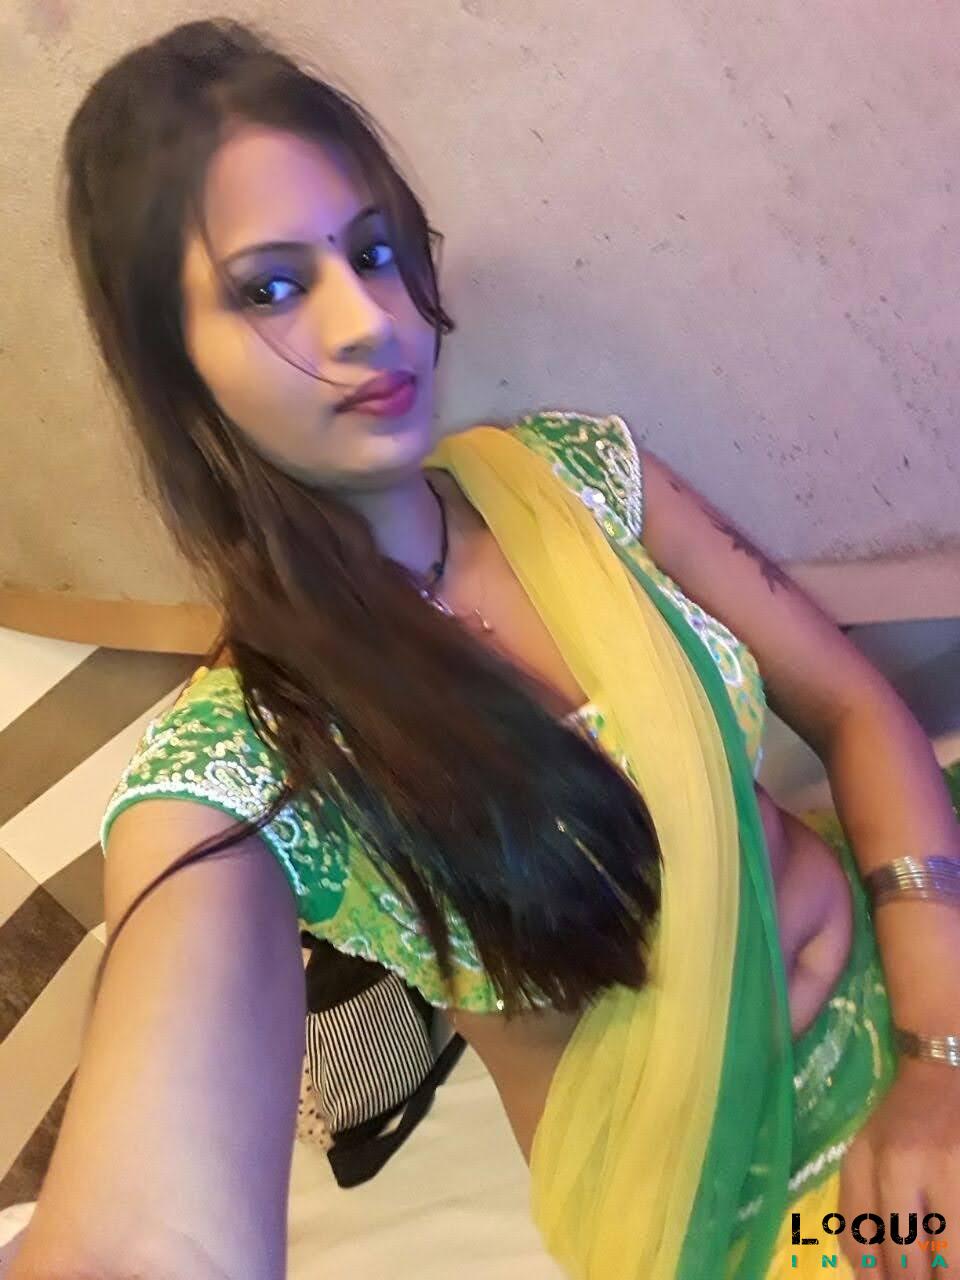 Call Girls West Bengal: Chak kanthalia Call ma❤️93341*57647❤️Low price call girl 100% TRUSTED cc